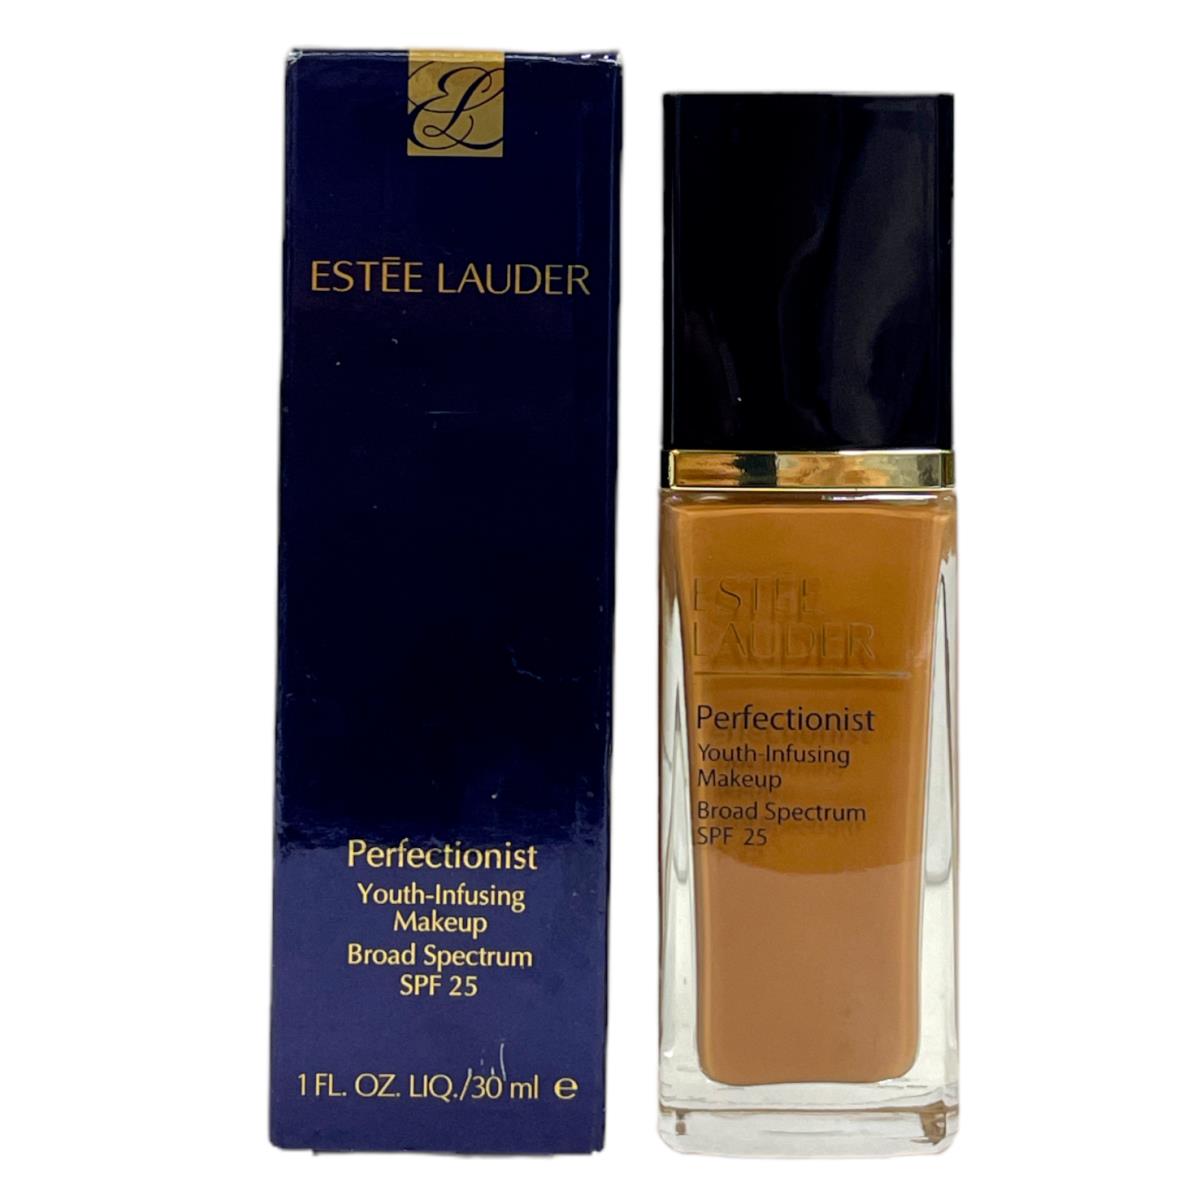 Estee Lauder Perfectionist Youth Infusing Makeup SPF25 1oz / 30mL You Pick 5C1 CHESTNUT